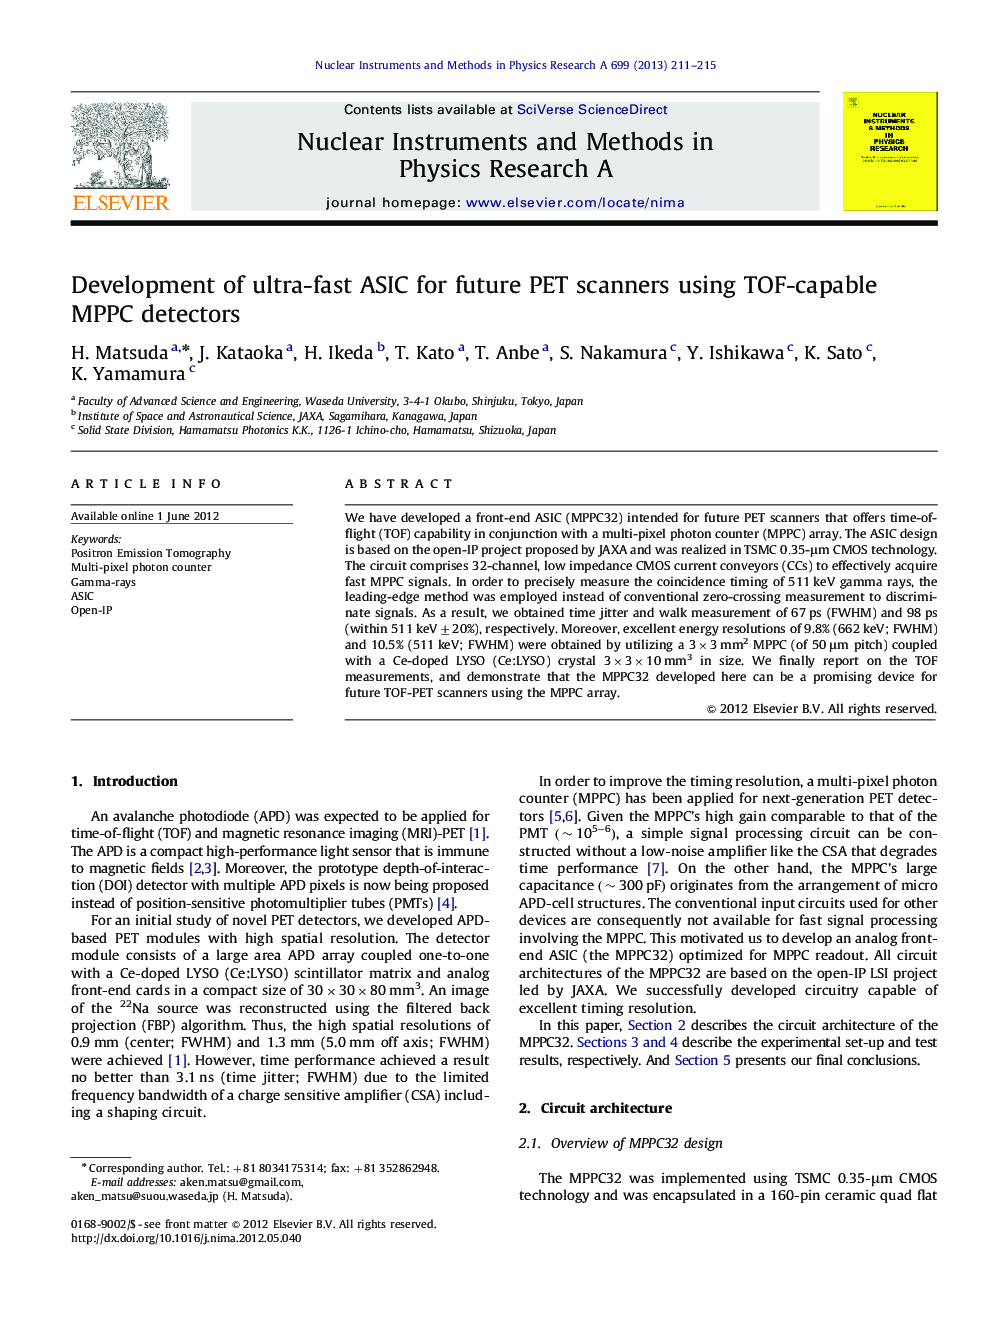 Development of ultra-fast ASIC for future PET scanners using TOF-capable MPPC detectors